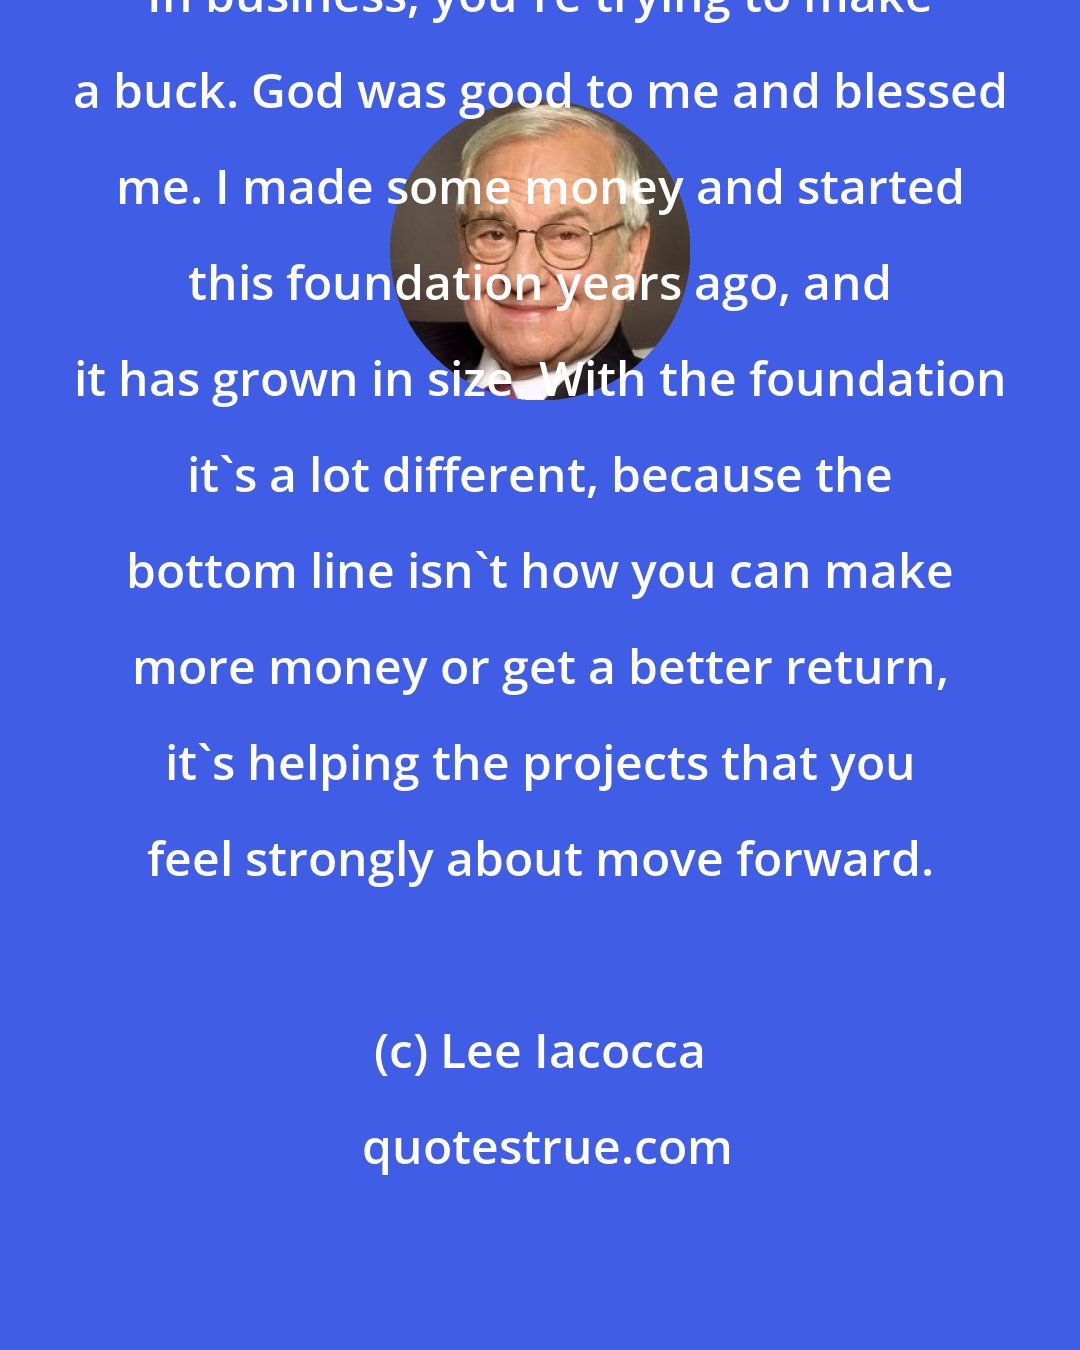 Lee Iacocca: In business, you're trying to make a buck. God was good to me and blessed me. I made some money and started this foundation years ago, and it has grown in size. With the foundation it's a lot different, because the bottom line isn't how you can make more money or get a better return, it's helping the projects that you feel strongly about move forward.